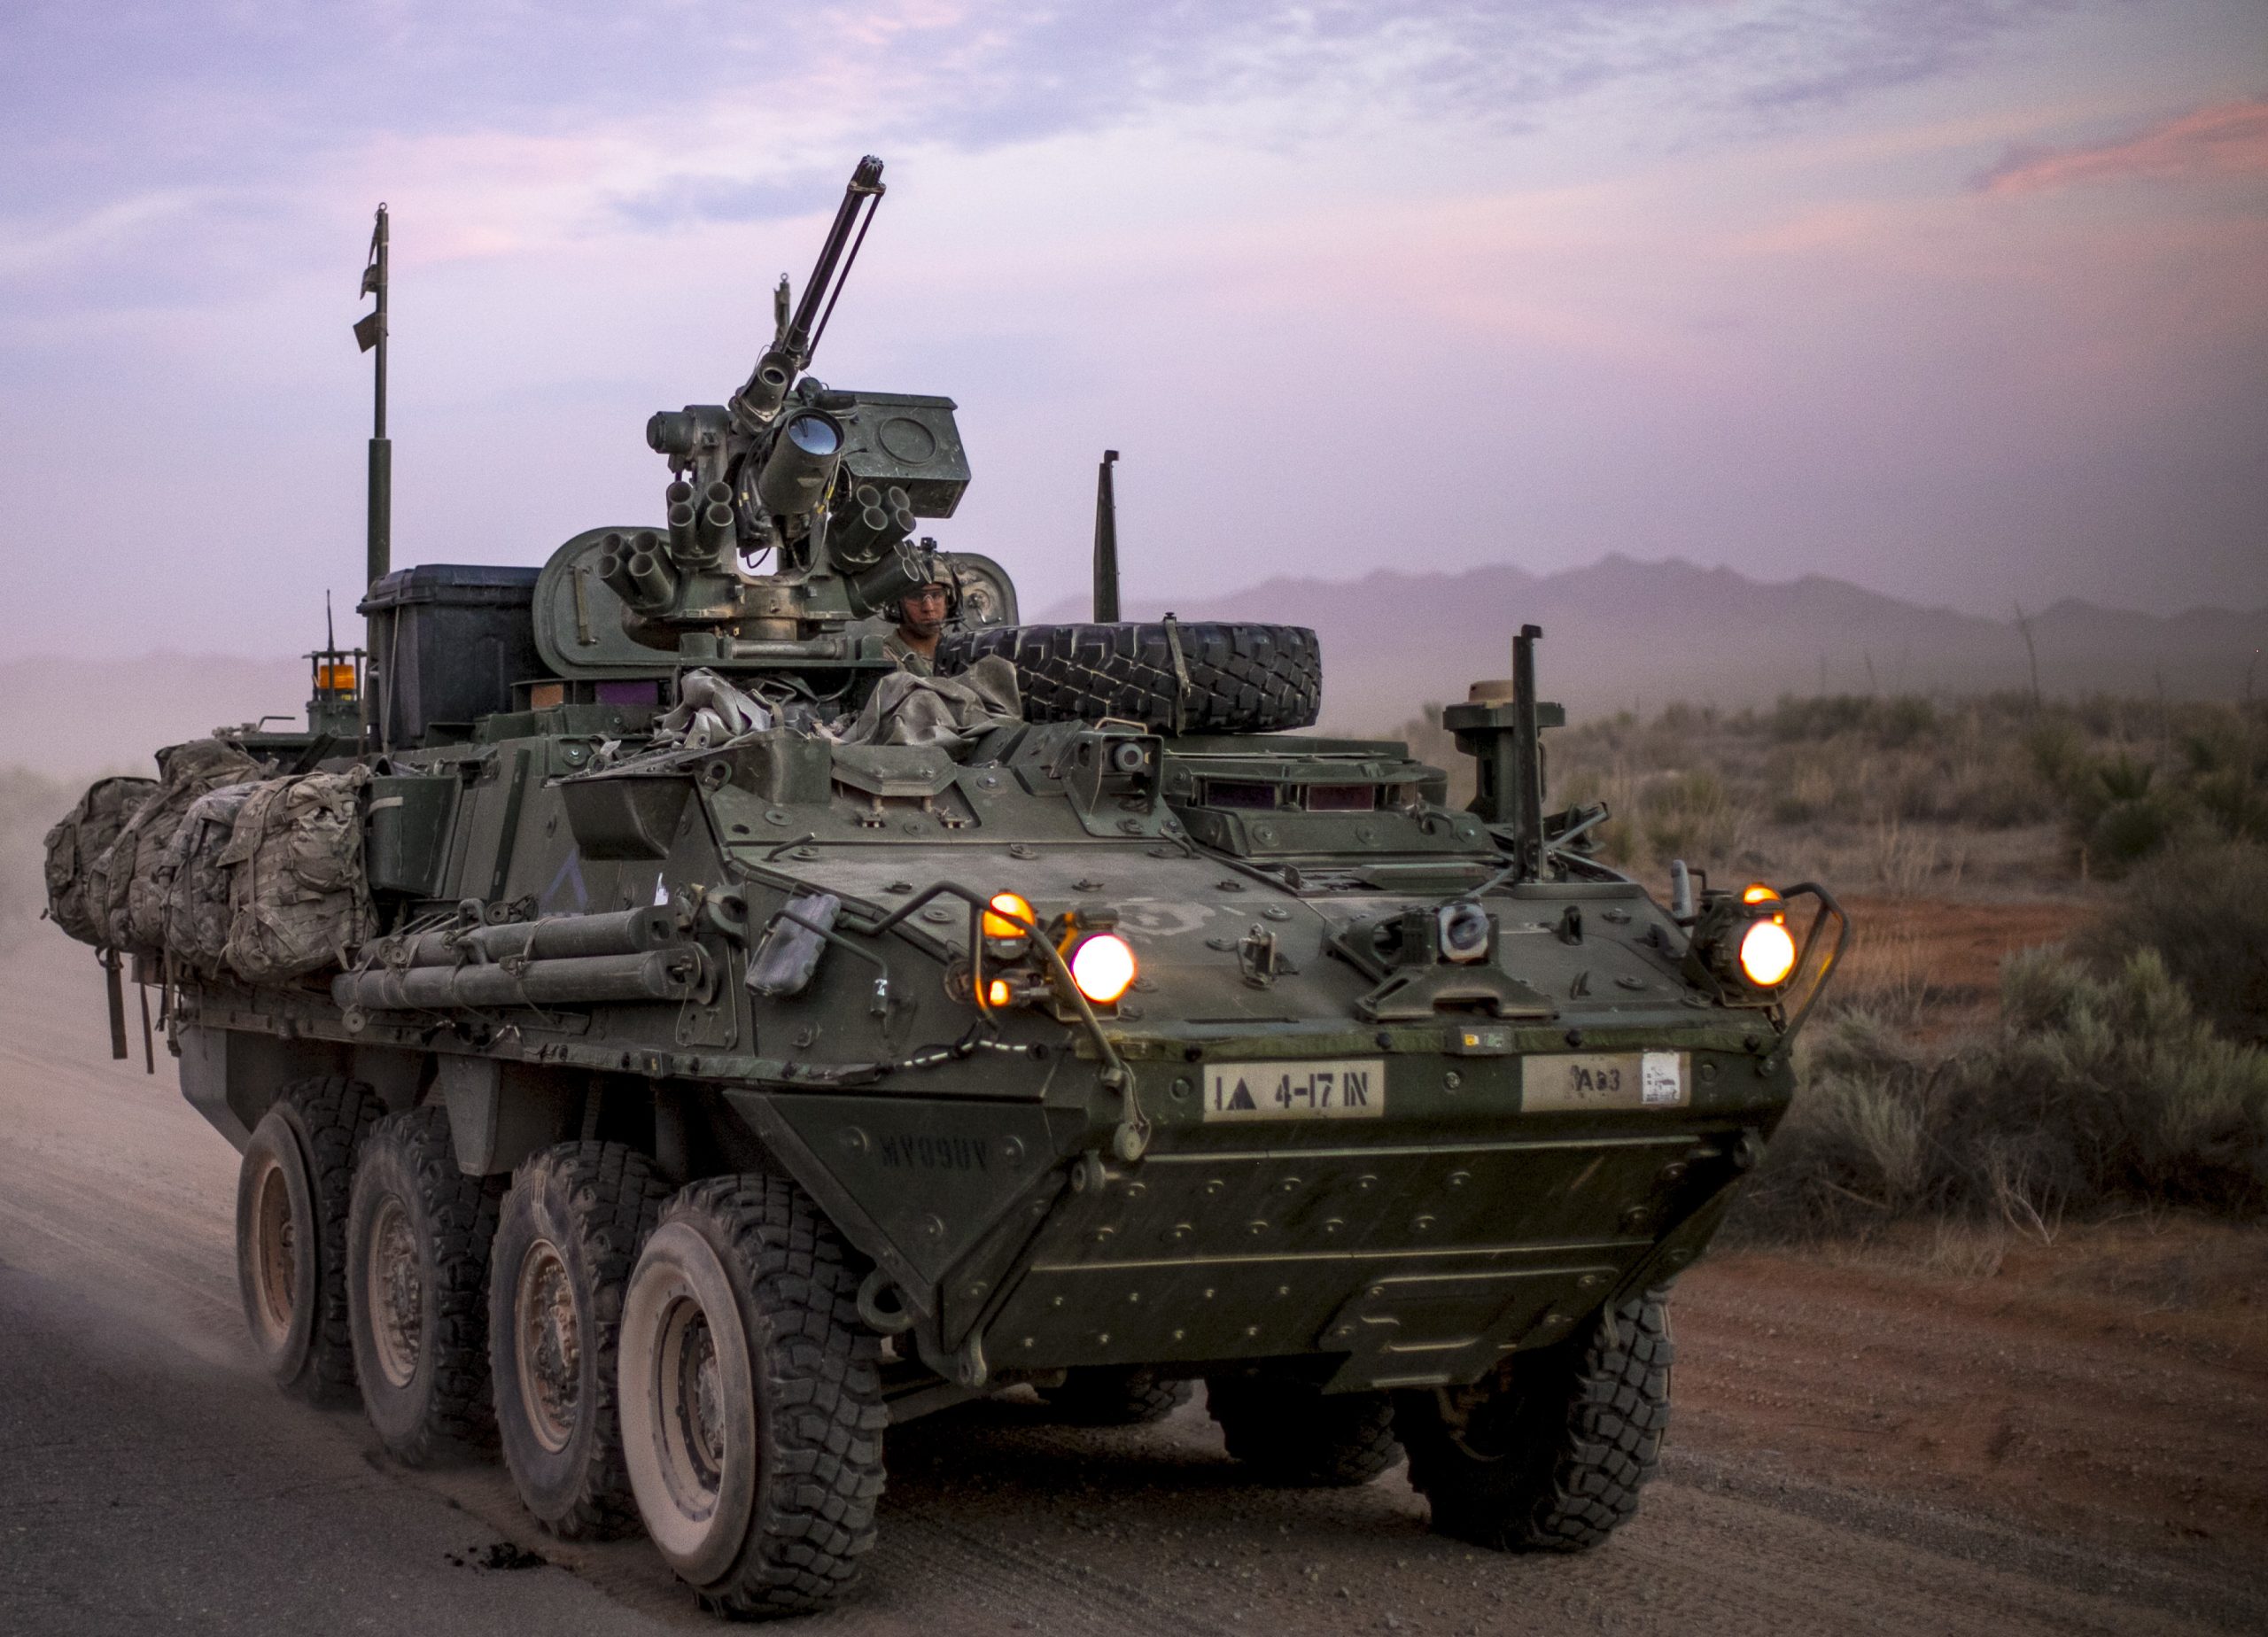 STRYKER assigned to 1st Brigade Combat Team, 4-17 Infantry Battalion passed the Combat Aviation Brigade's convoy on the way to Division's wide Iron Focus field exercise.